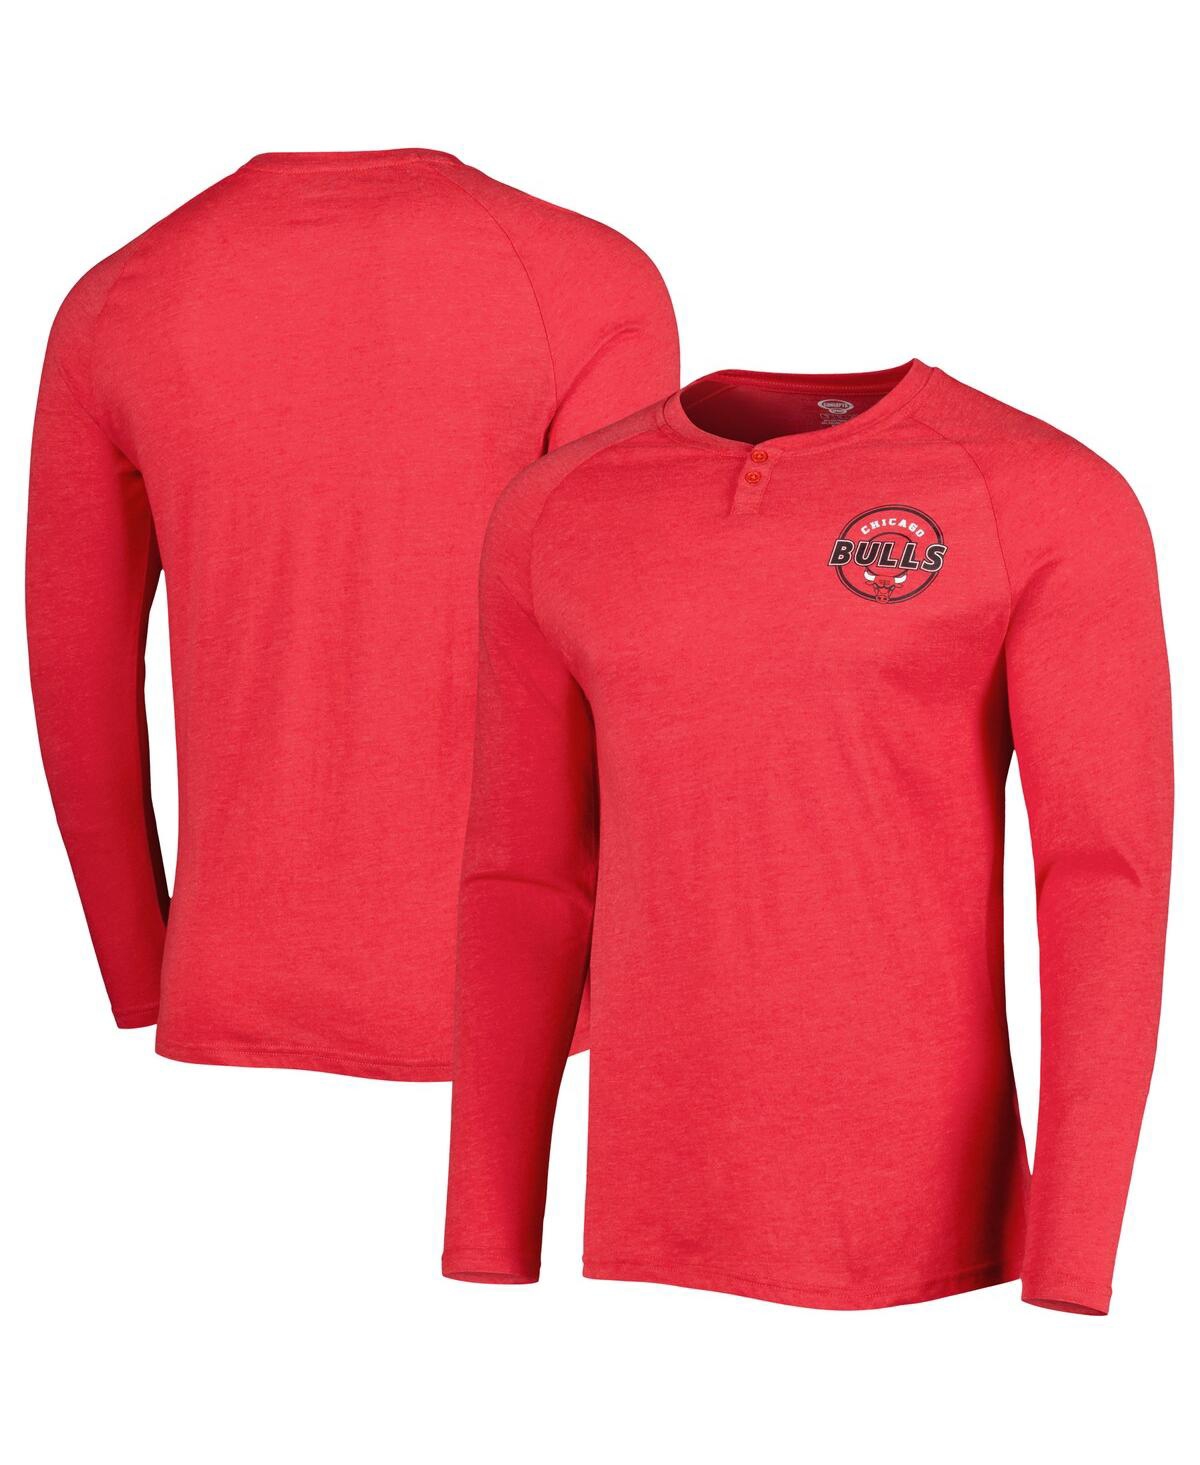 Men's Concepts Sport Heathered Red Chicago Bulls Left Chest Henley Raglan Long Sleeve T-shirt - Heathered Red